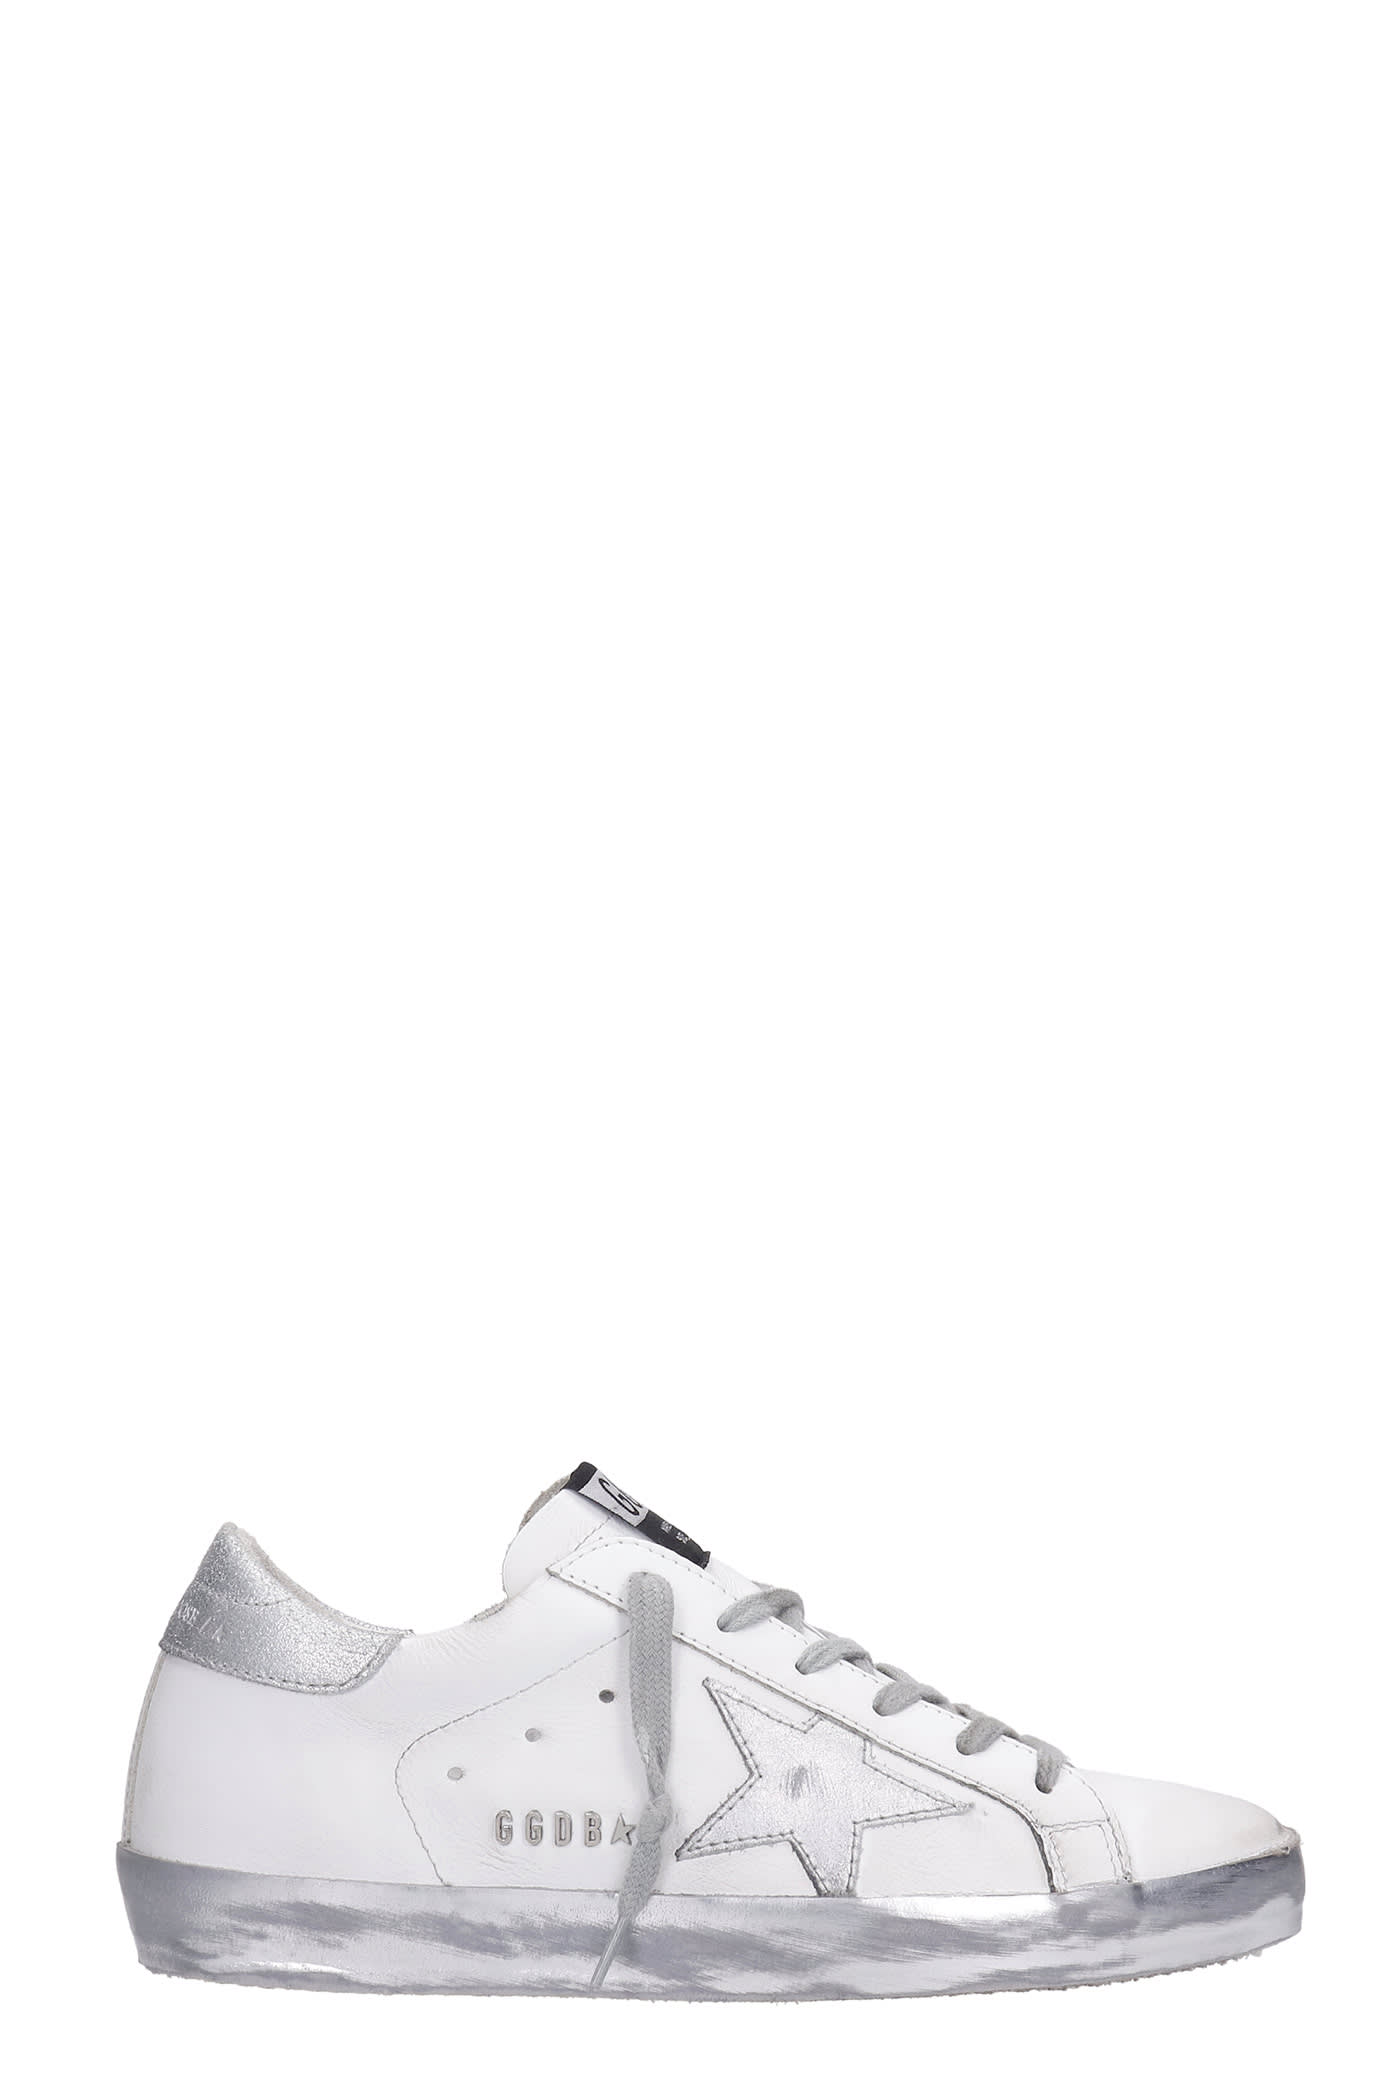 GOLDEN GOOSE SUPERSTAR SNEAKERS IN WHITE LEATHER,GWF00101F00031480185